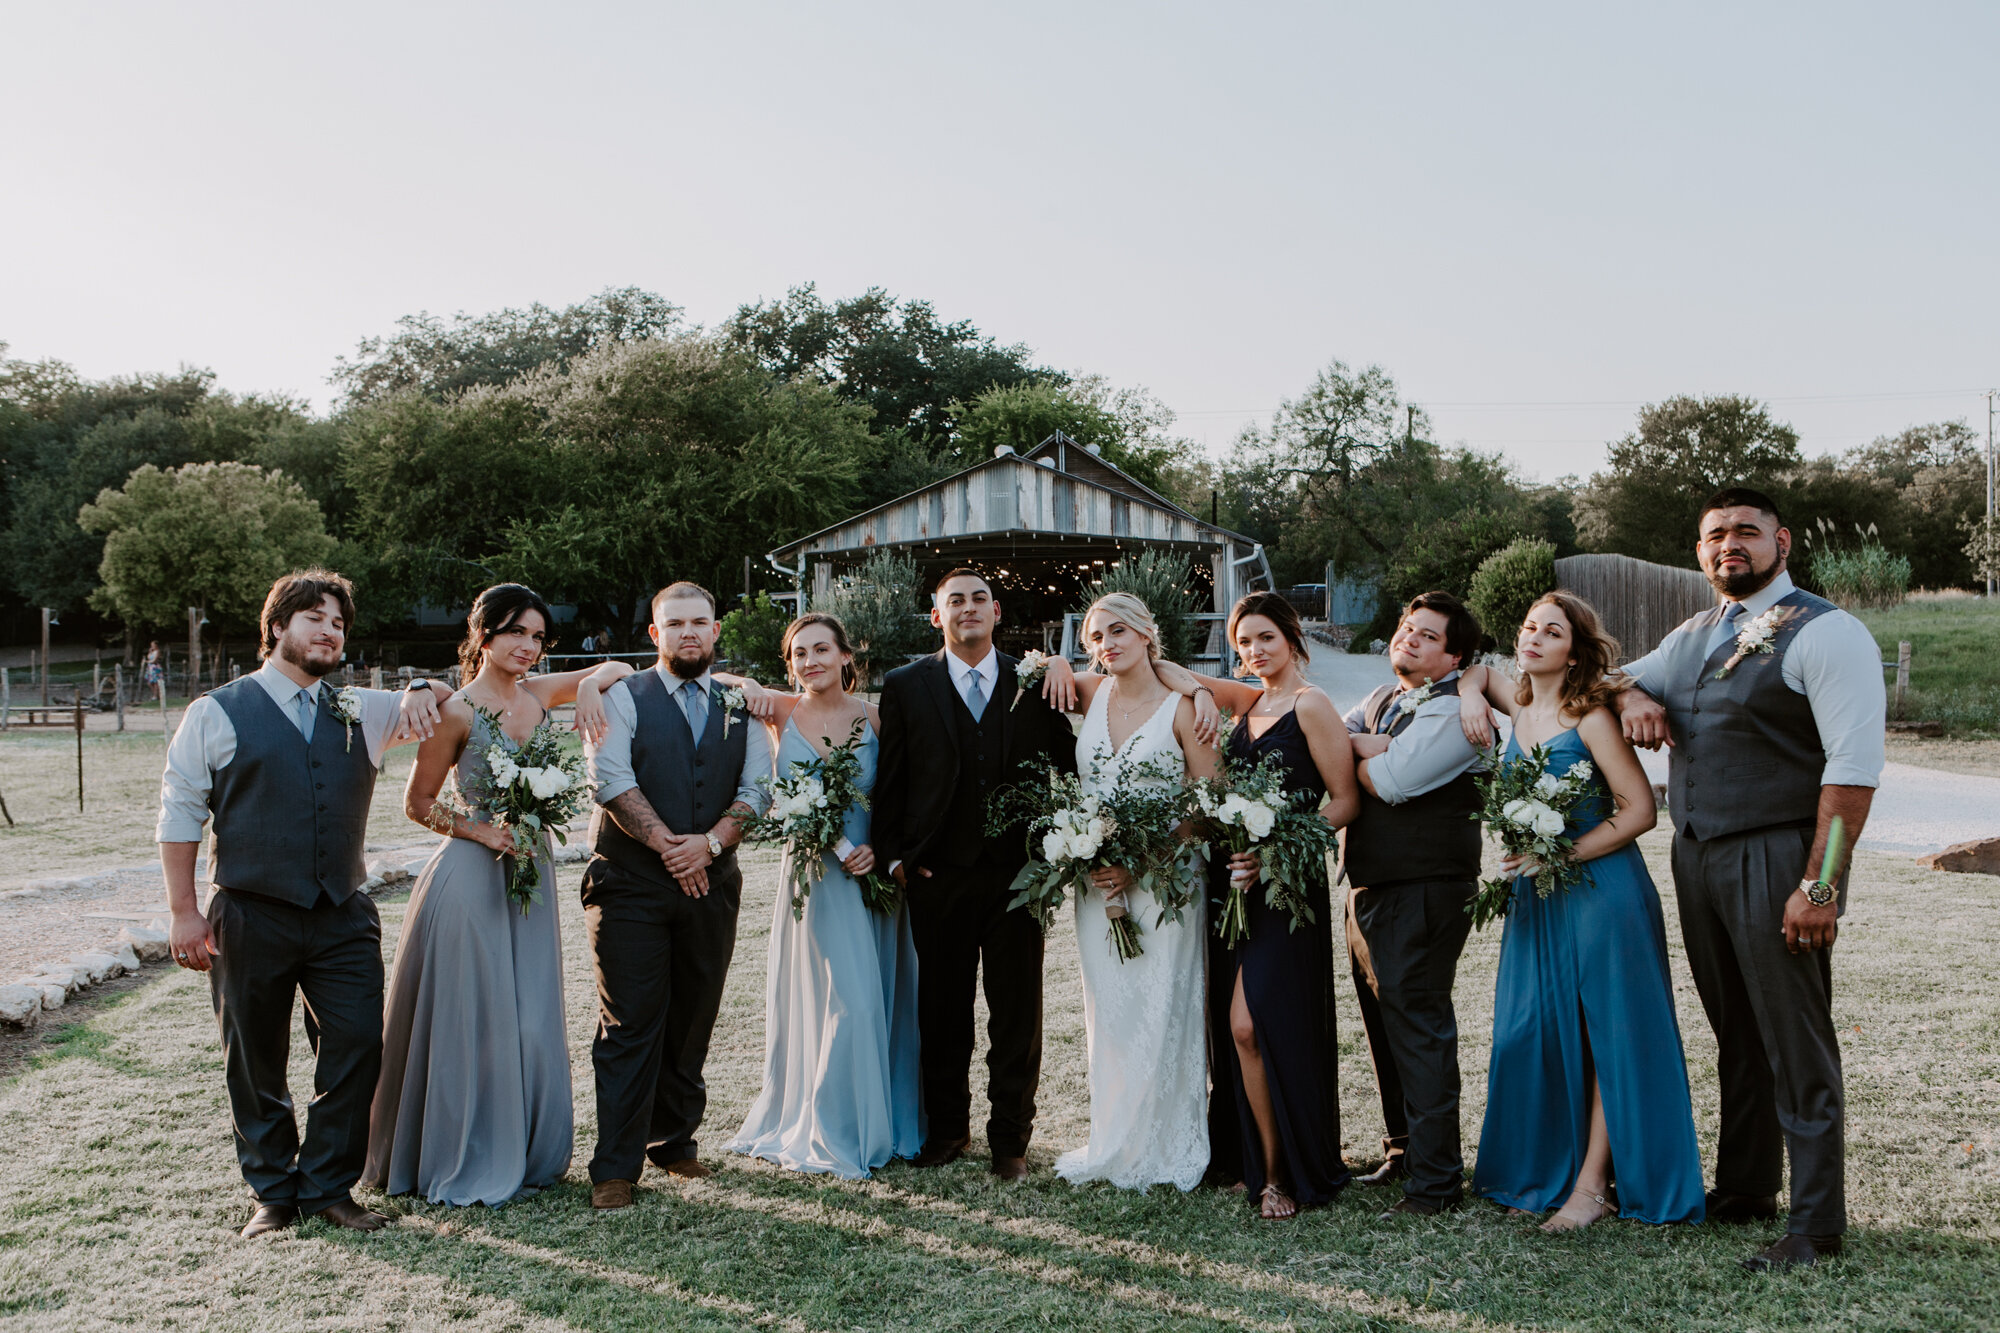 Bride and groom with bridal party cool sassy poses. Radiant Bohemian Hill Country Wedding at Gruene Estate in New Braunfels, TX